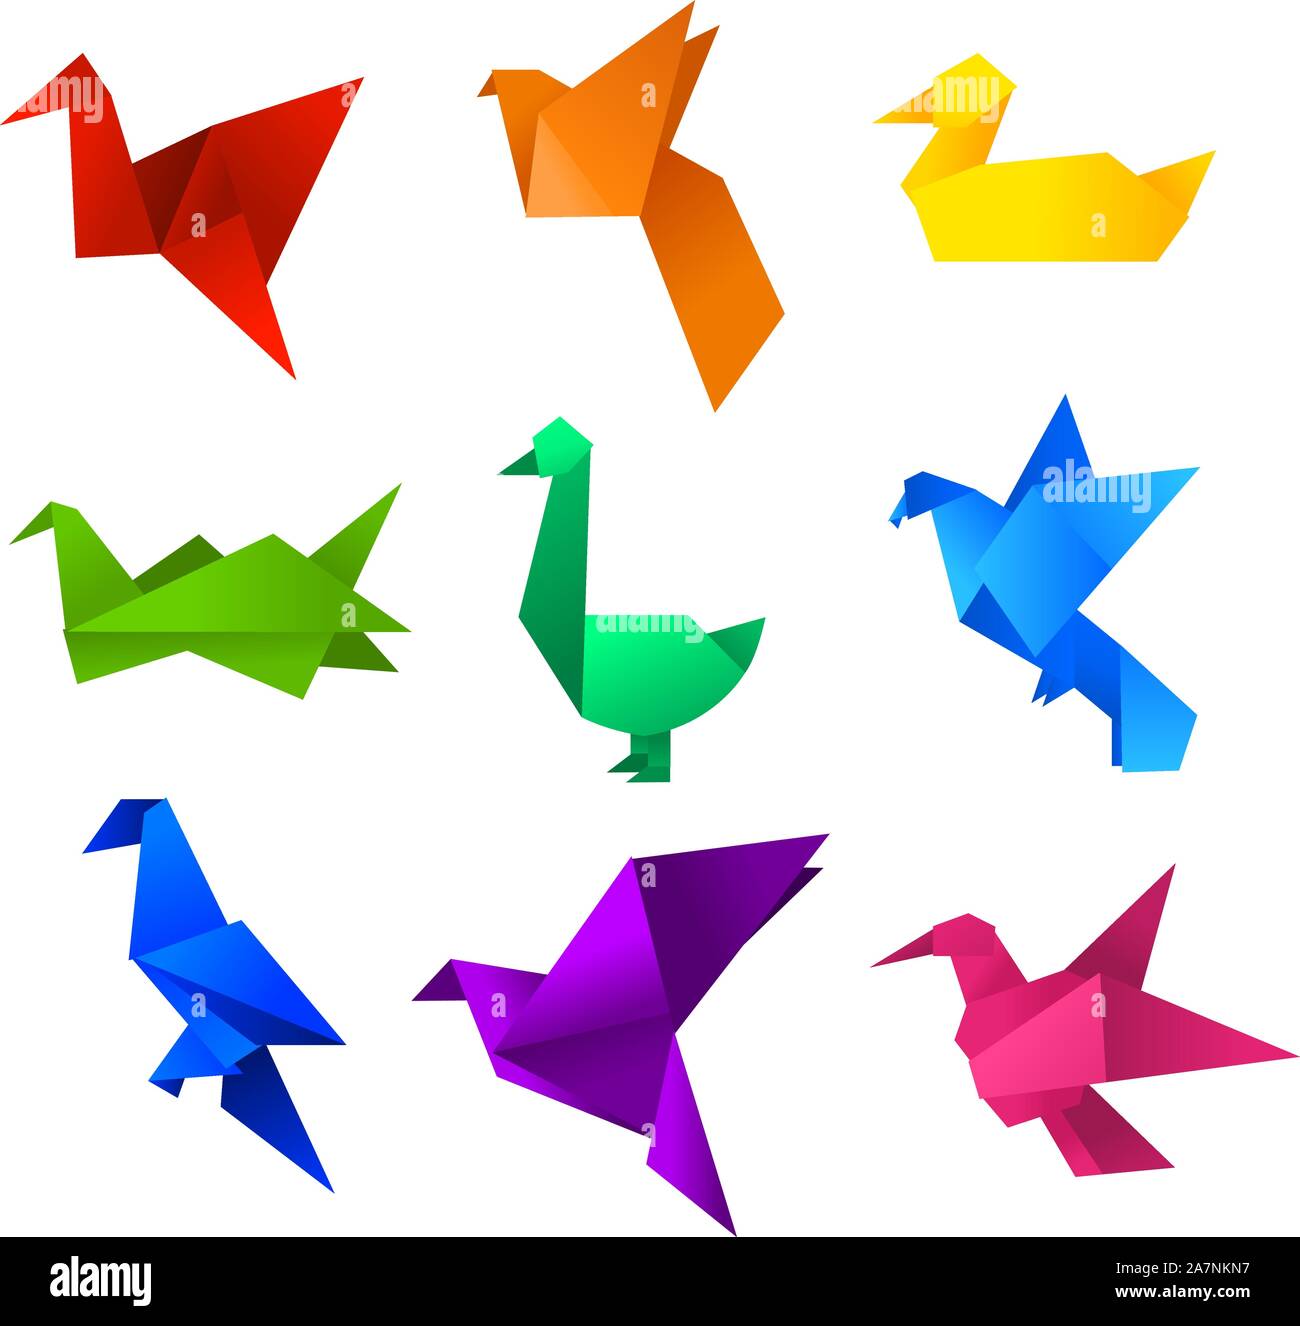 Origami birds icons set. With nine (9) different origami birds in different colours like: red, orange, yellow, green, turquoise, blue, light blue, vio Stock Vector